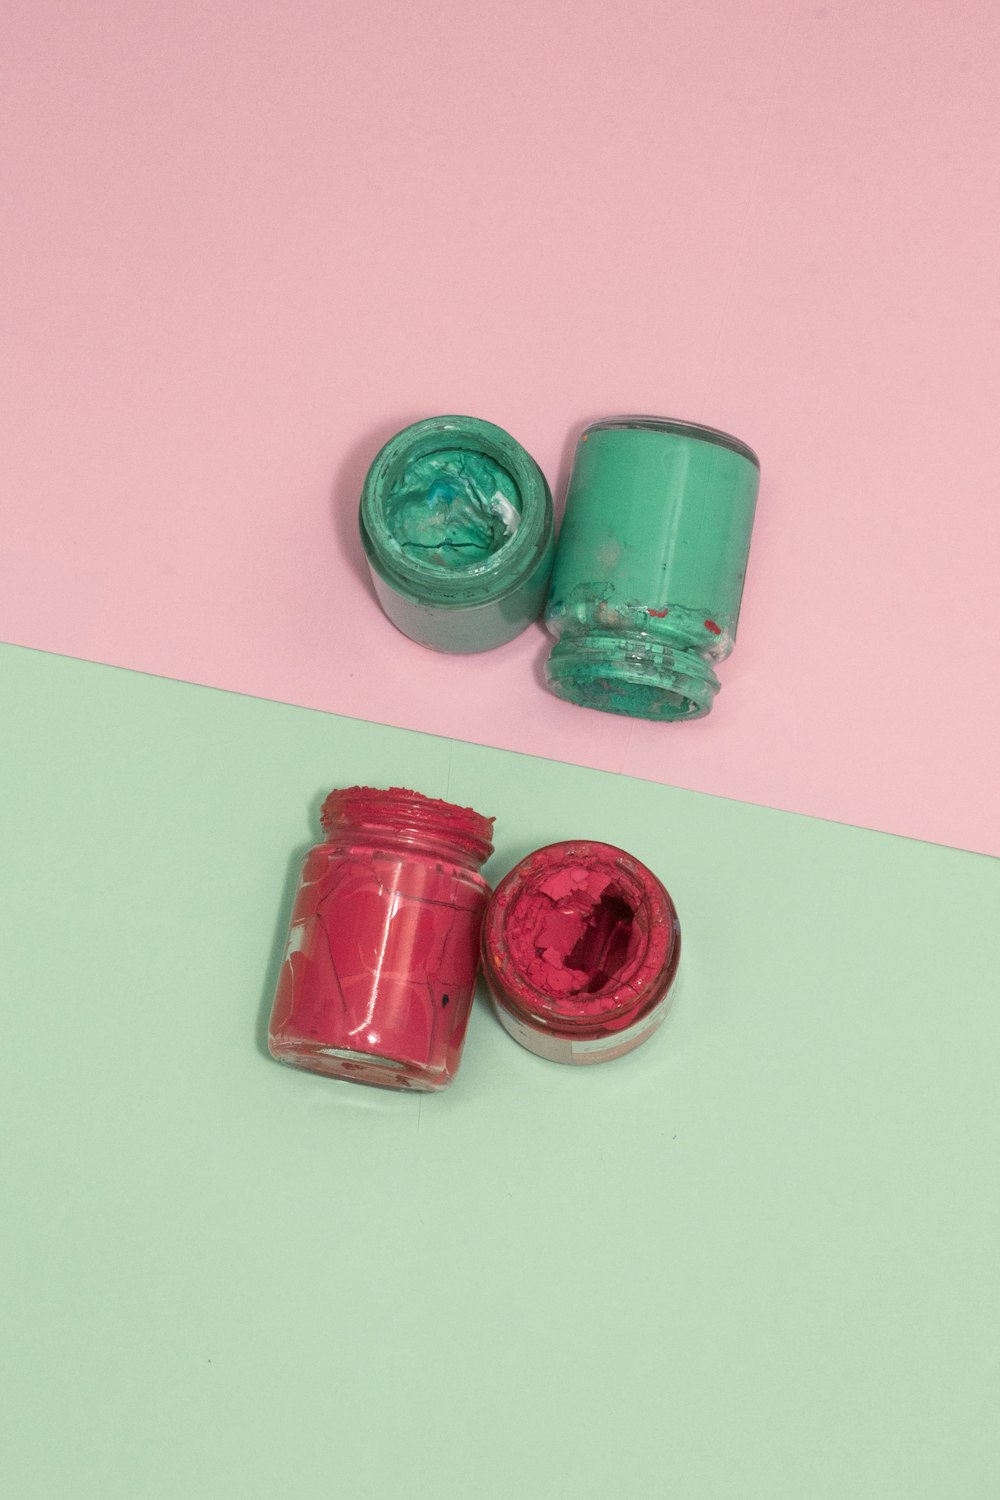 pink and green round plastic containers